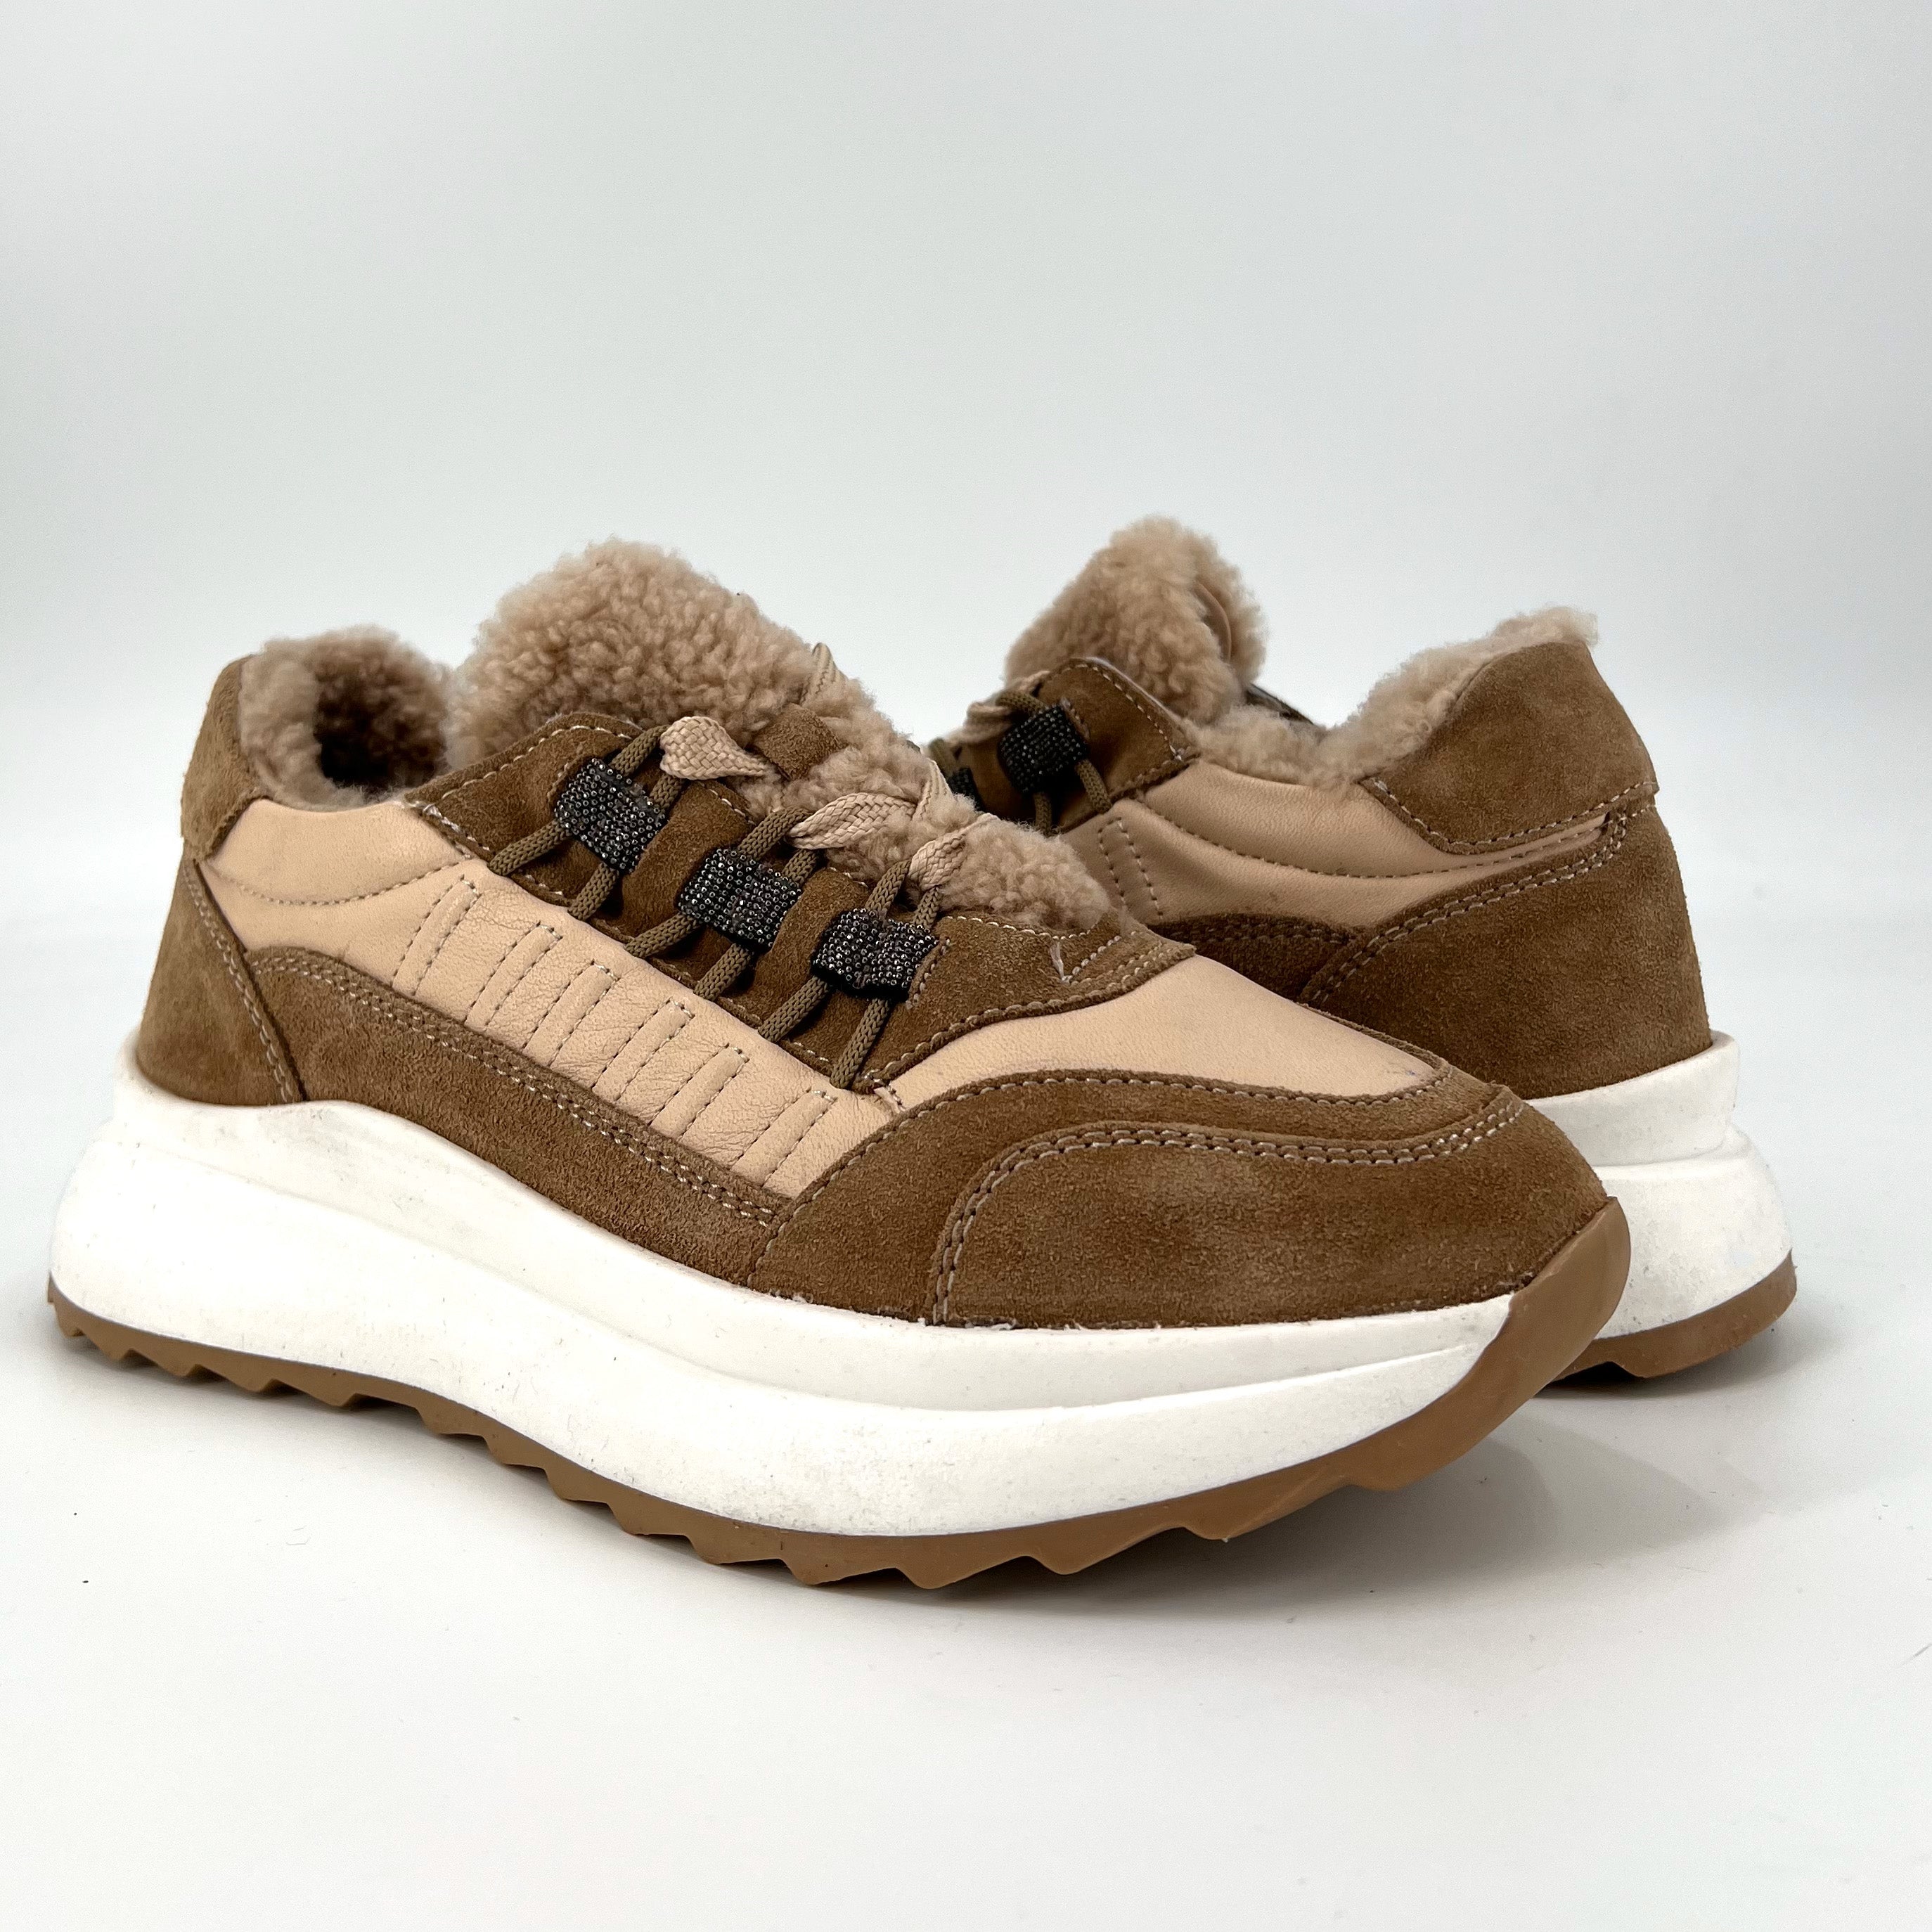 The Fur Lined Lace Trainer in Tan